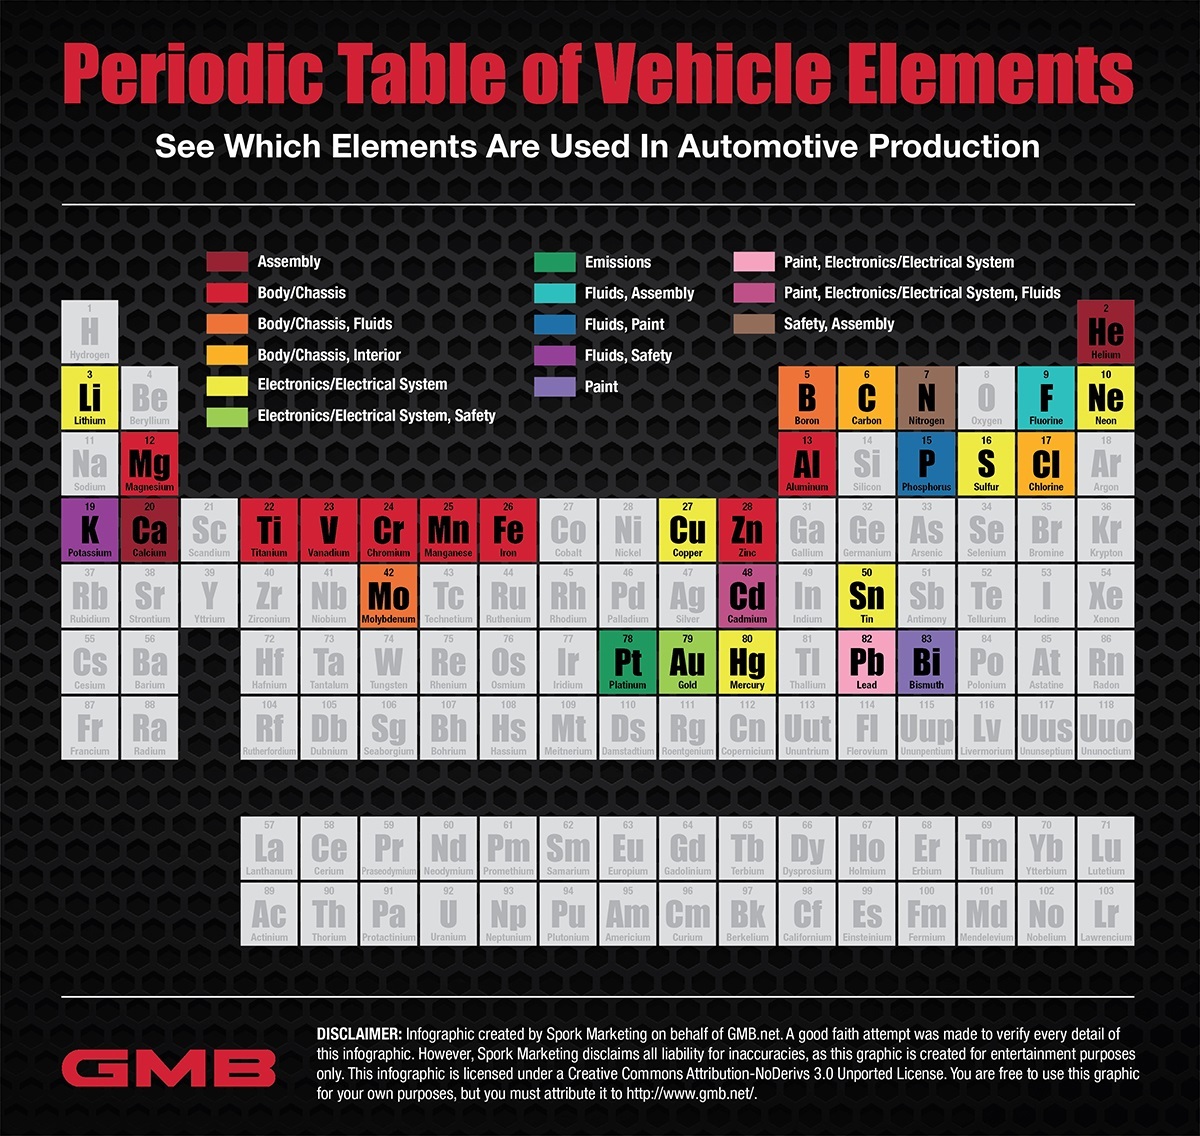 Periodic Table Illustrates Elements Used In car Manufacturing